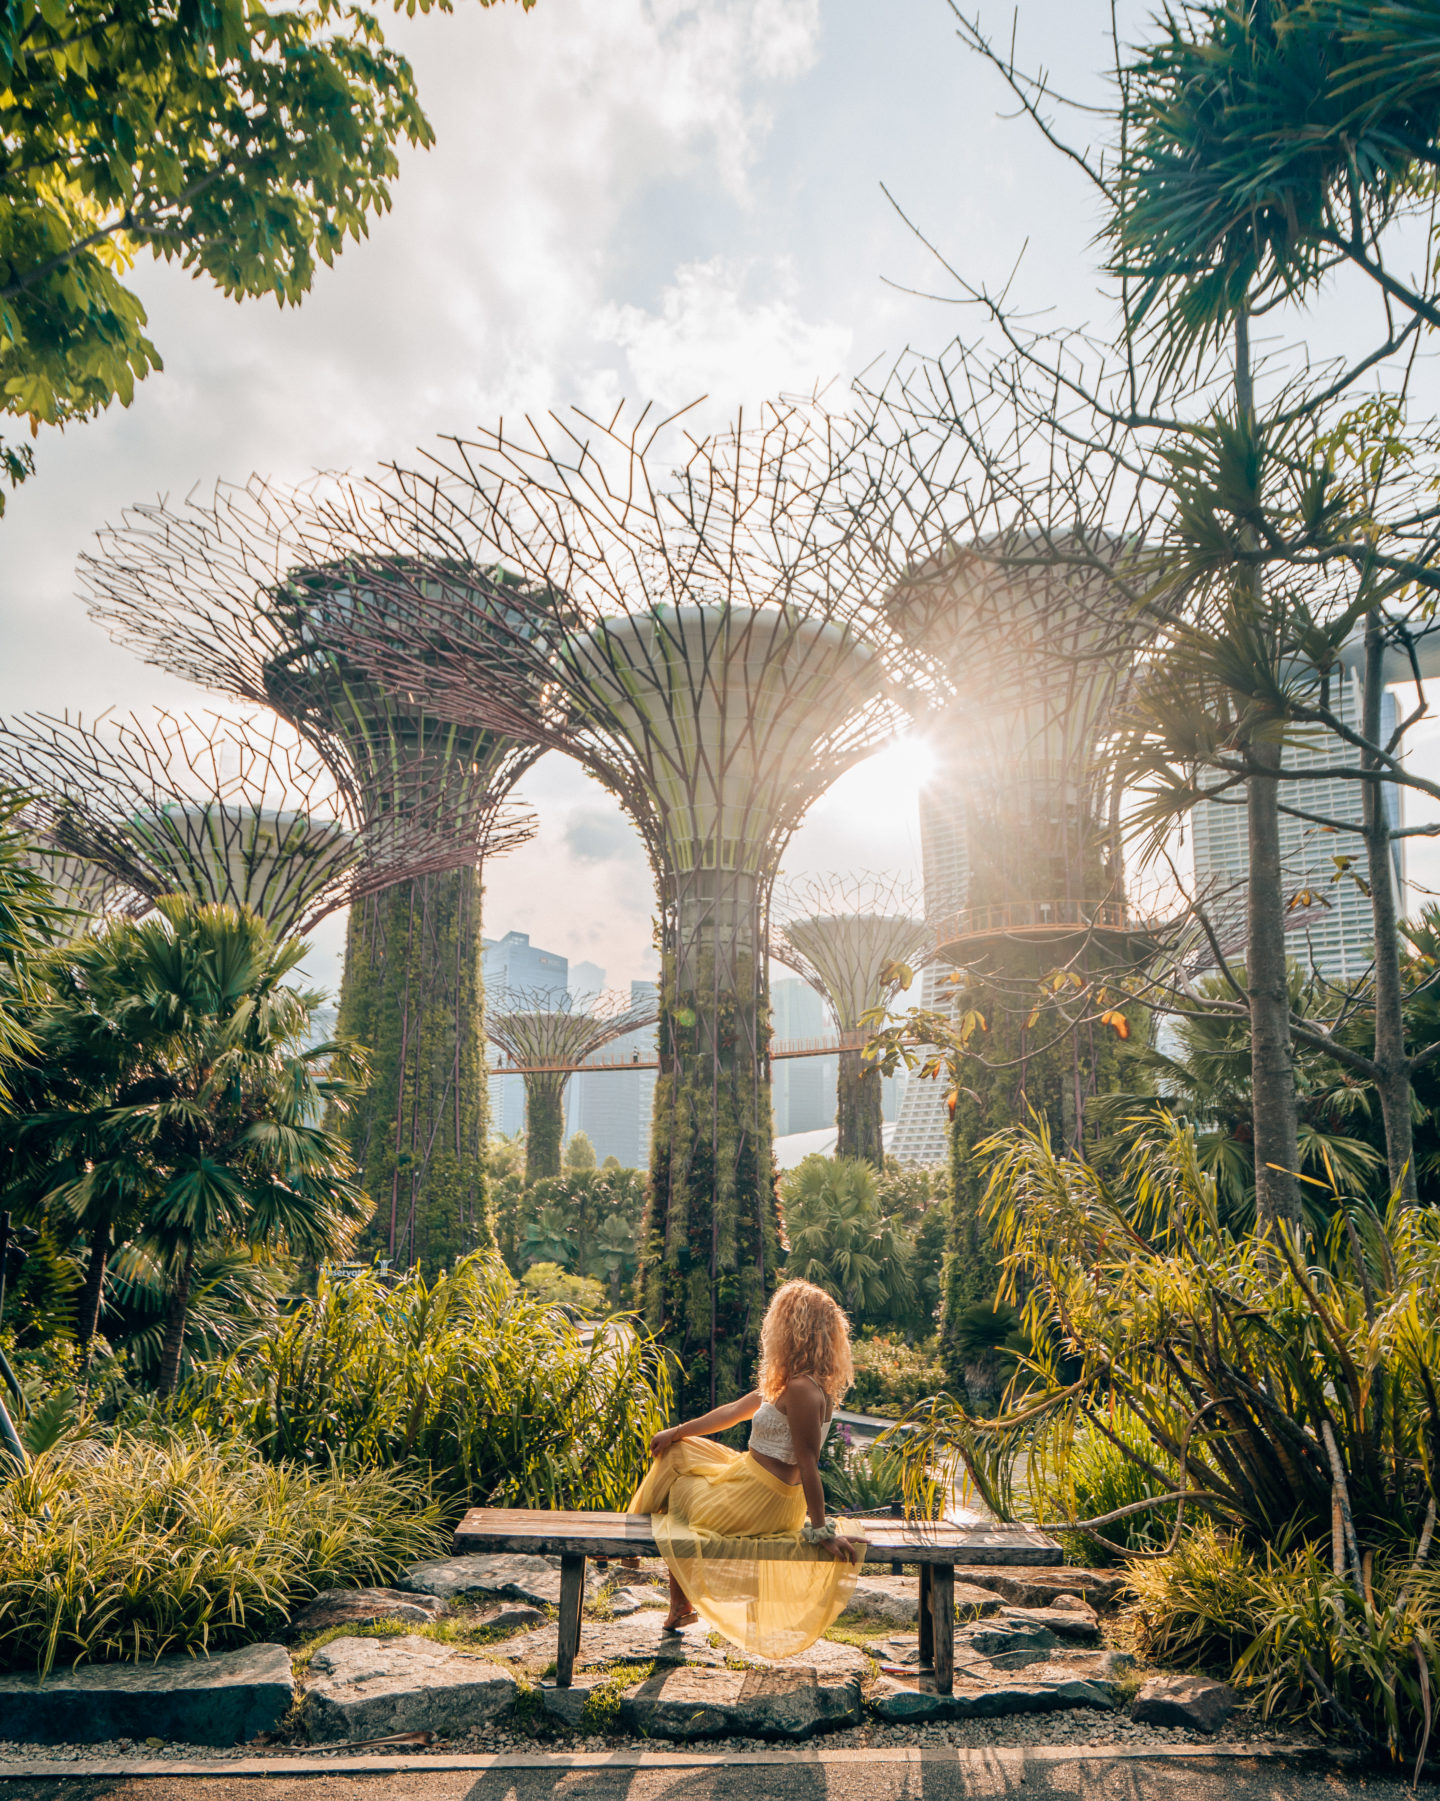 Supertree grove in Gardens by the Bay, Singapore